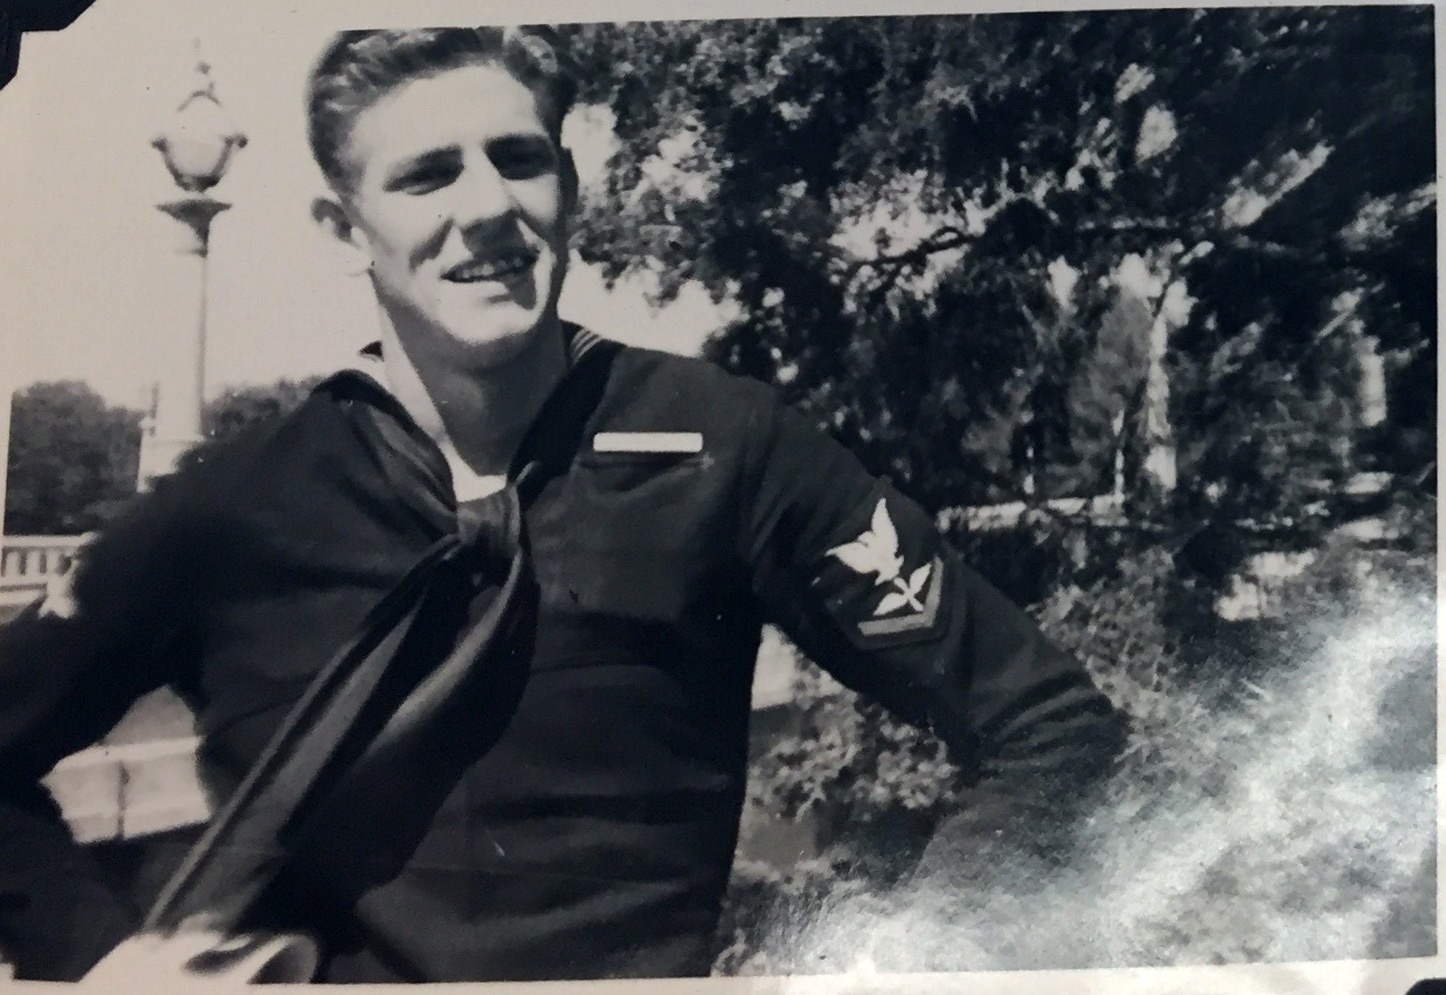 About 1942 my Father Walter Hopp